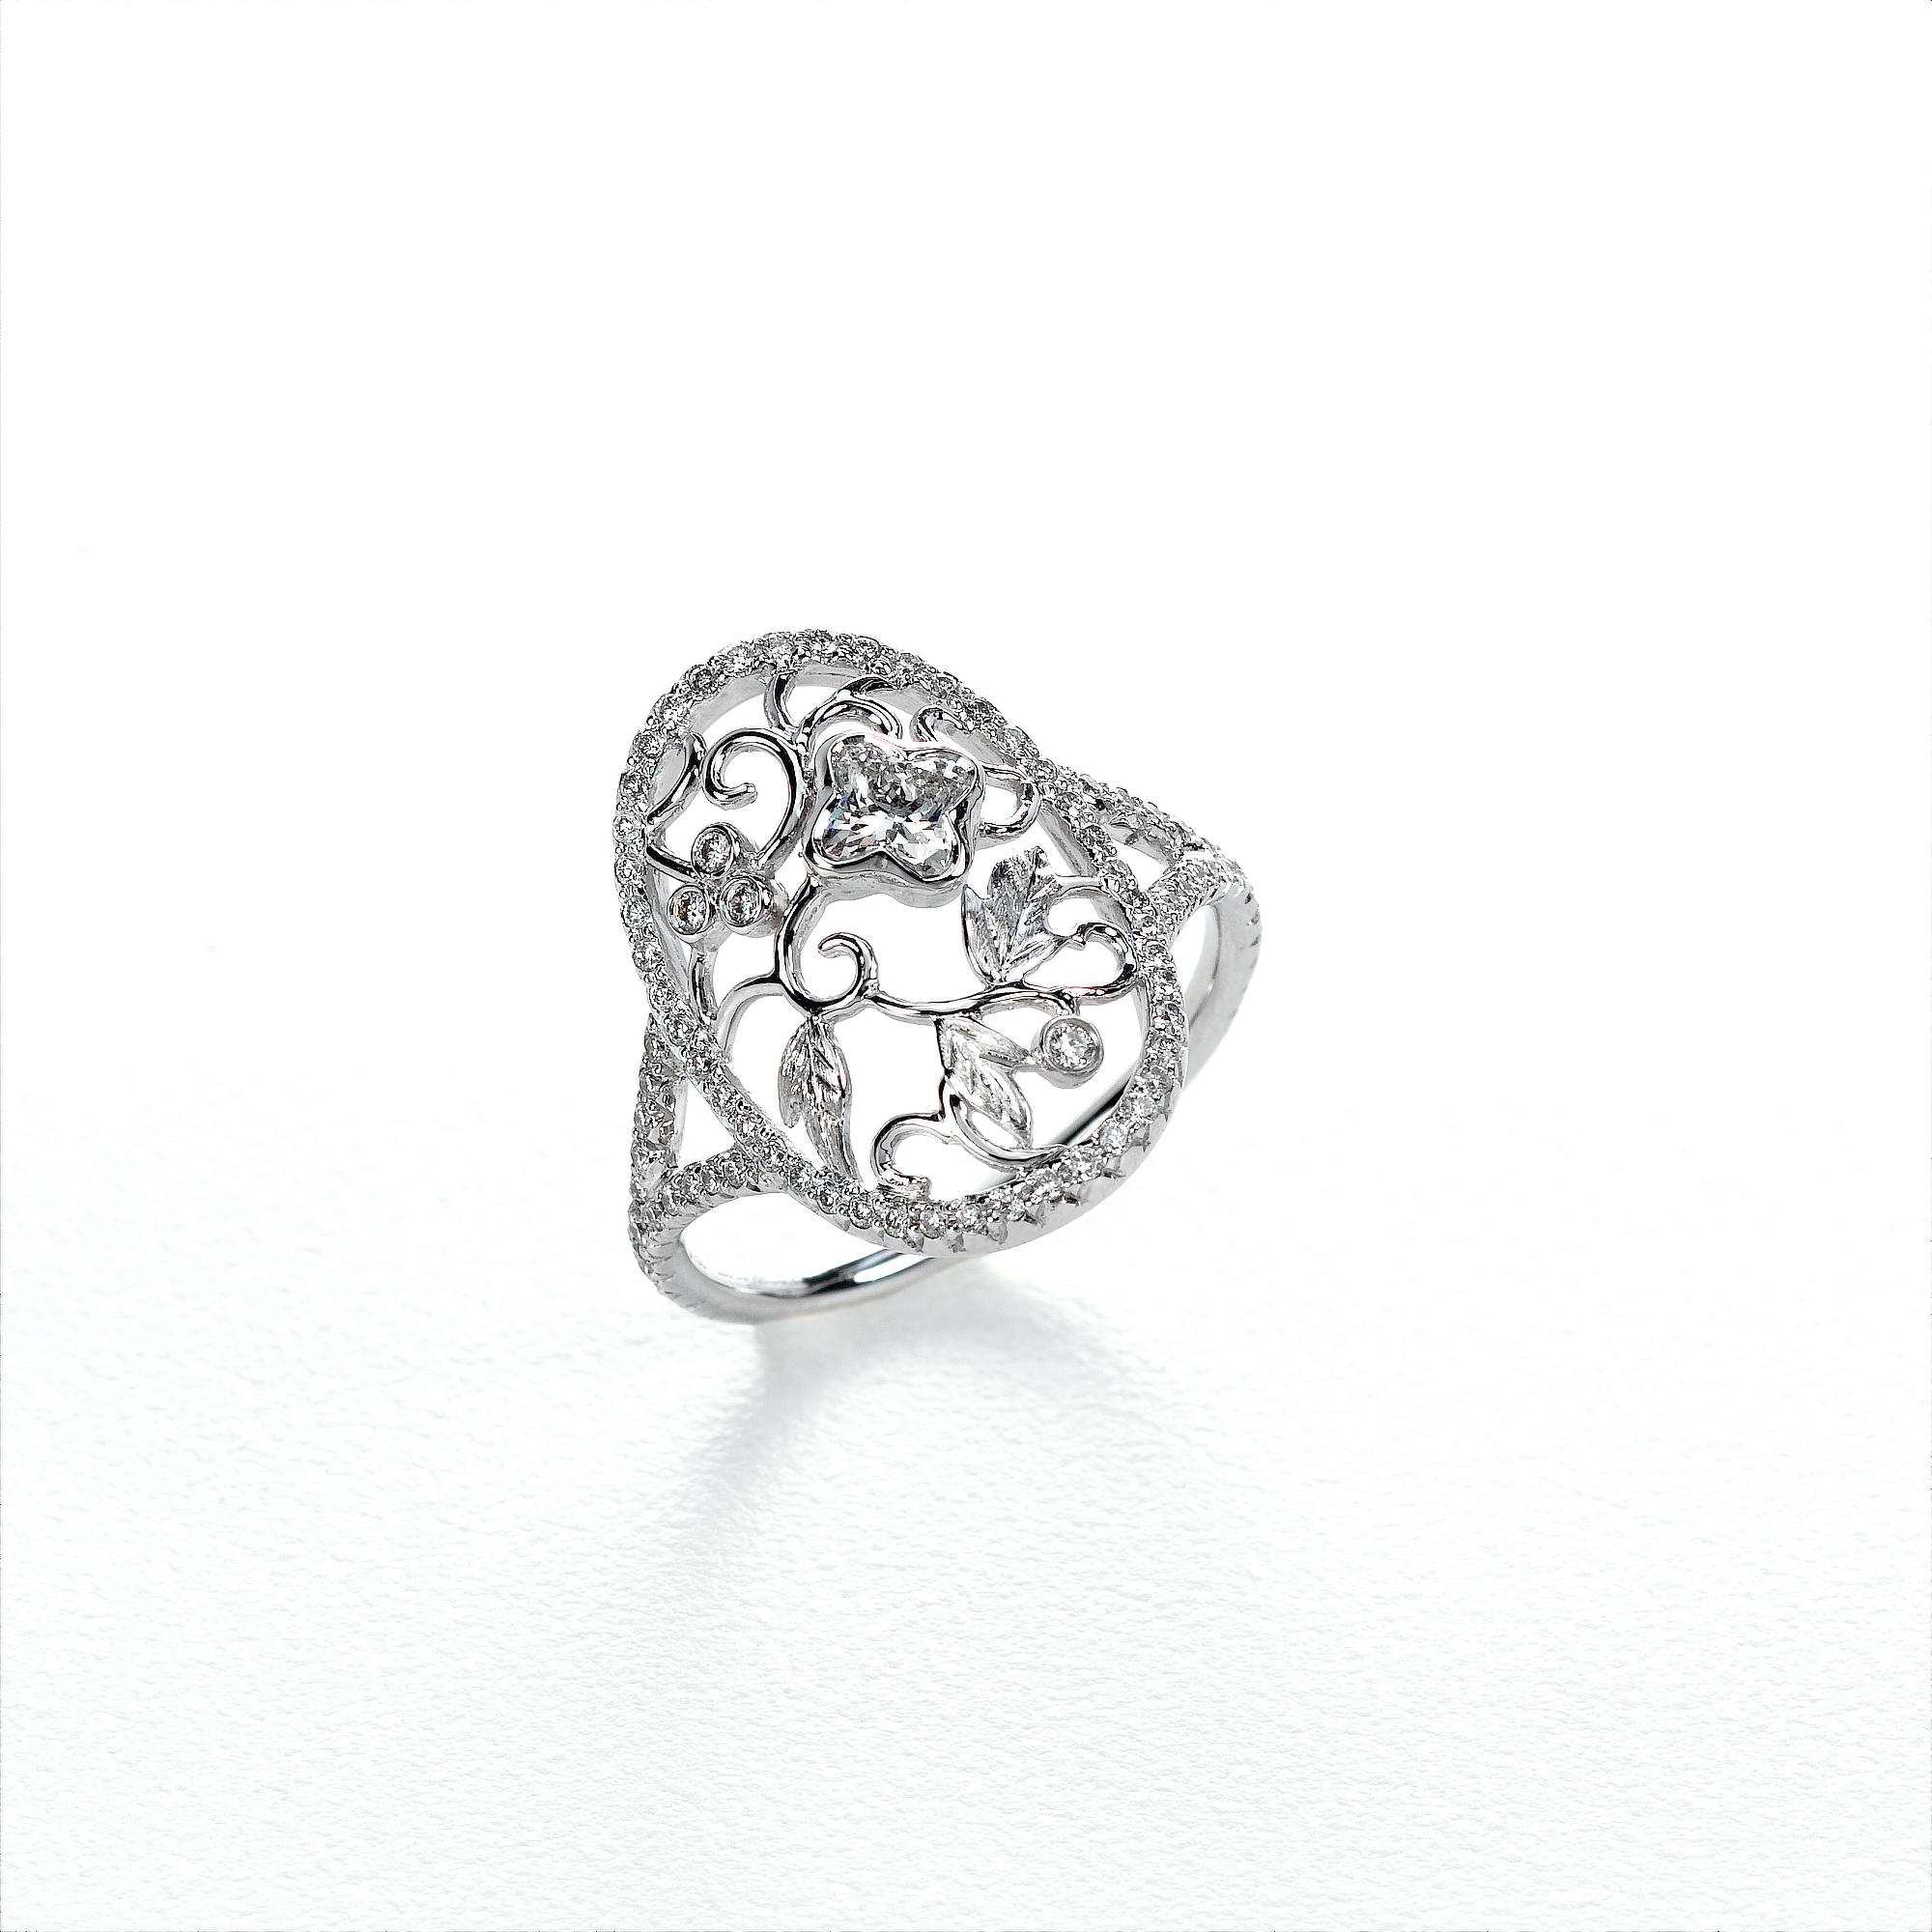 18 Karat White Gold Diamond Flower leaf Cocktail ring 0.62 Carat Total  .1 LILY CUT ® flower shape diamond H color VS SI clarity  0.30 cts . Additional 0.32 ct round diamond accent . Available in  Finger sizes 5,6,7 .